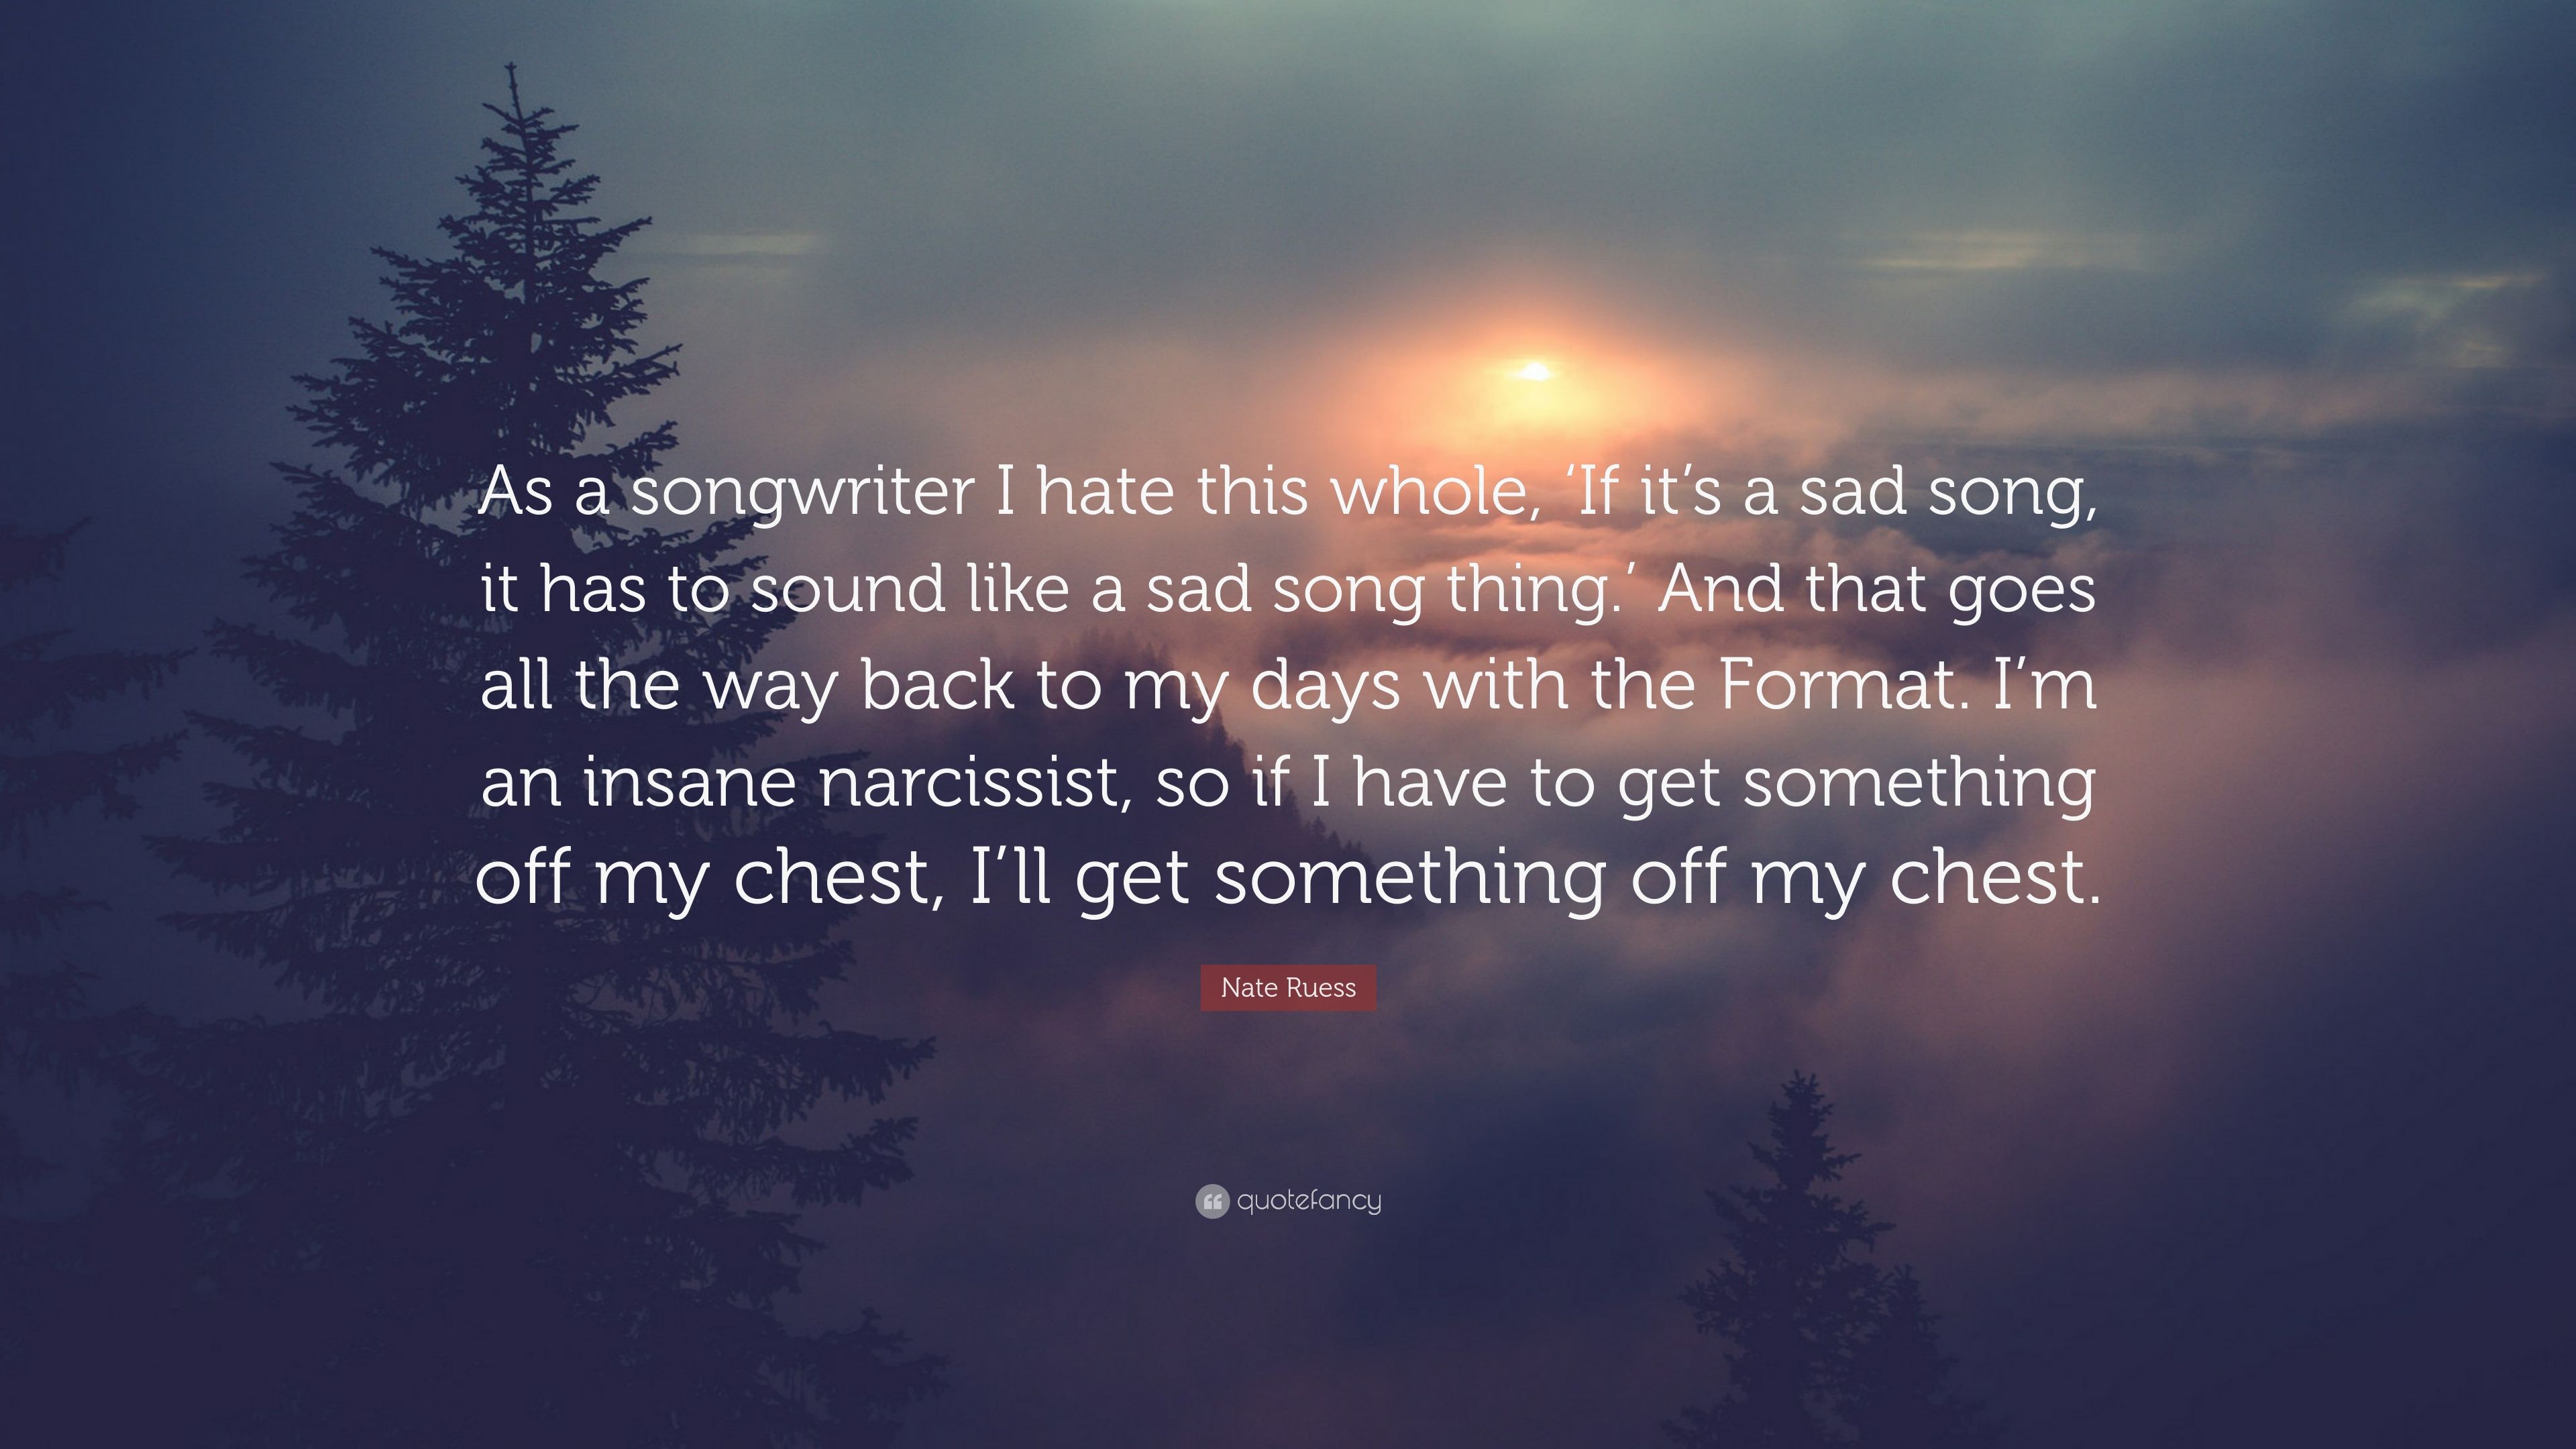 3840x2160 Nate Ruess Quote 8220 As A Songwriter I Hate This Whole If Its A Sad Song It Has To Sound Like A Sad Song Thing And That Goes All The Wa 8221 7 Wallpaper